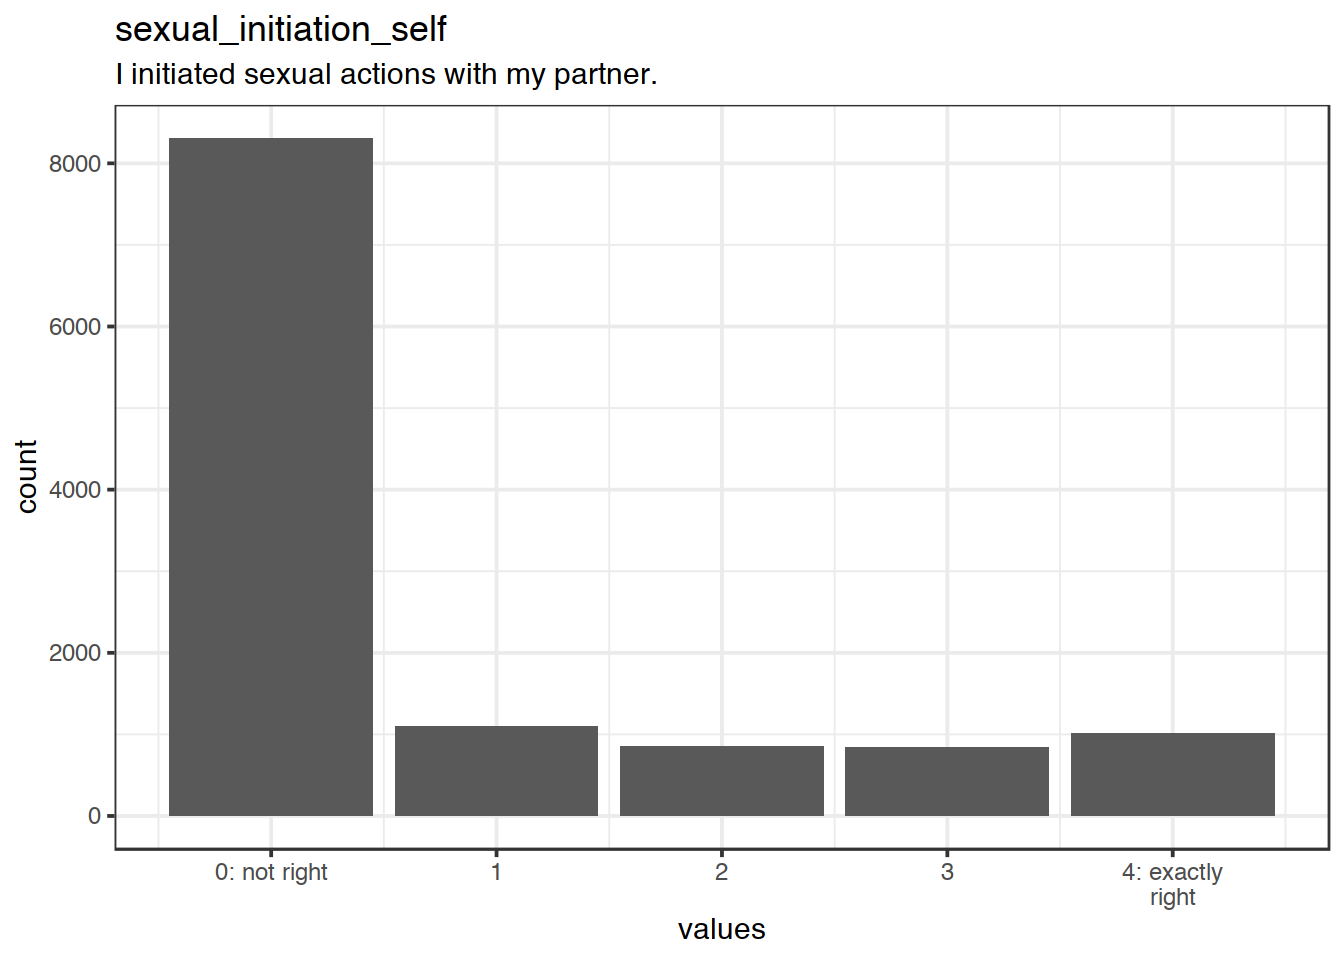 Distribution of values for sexual_initiation_self